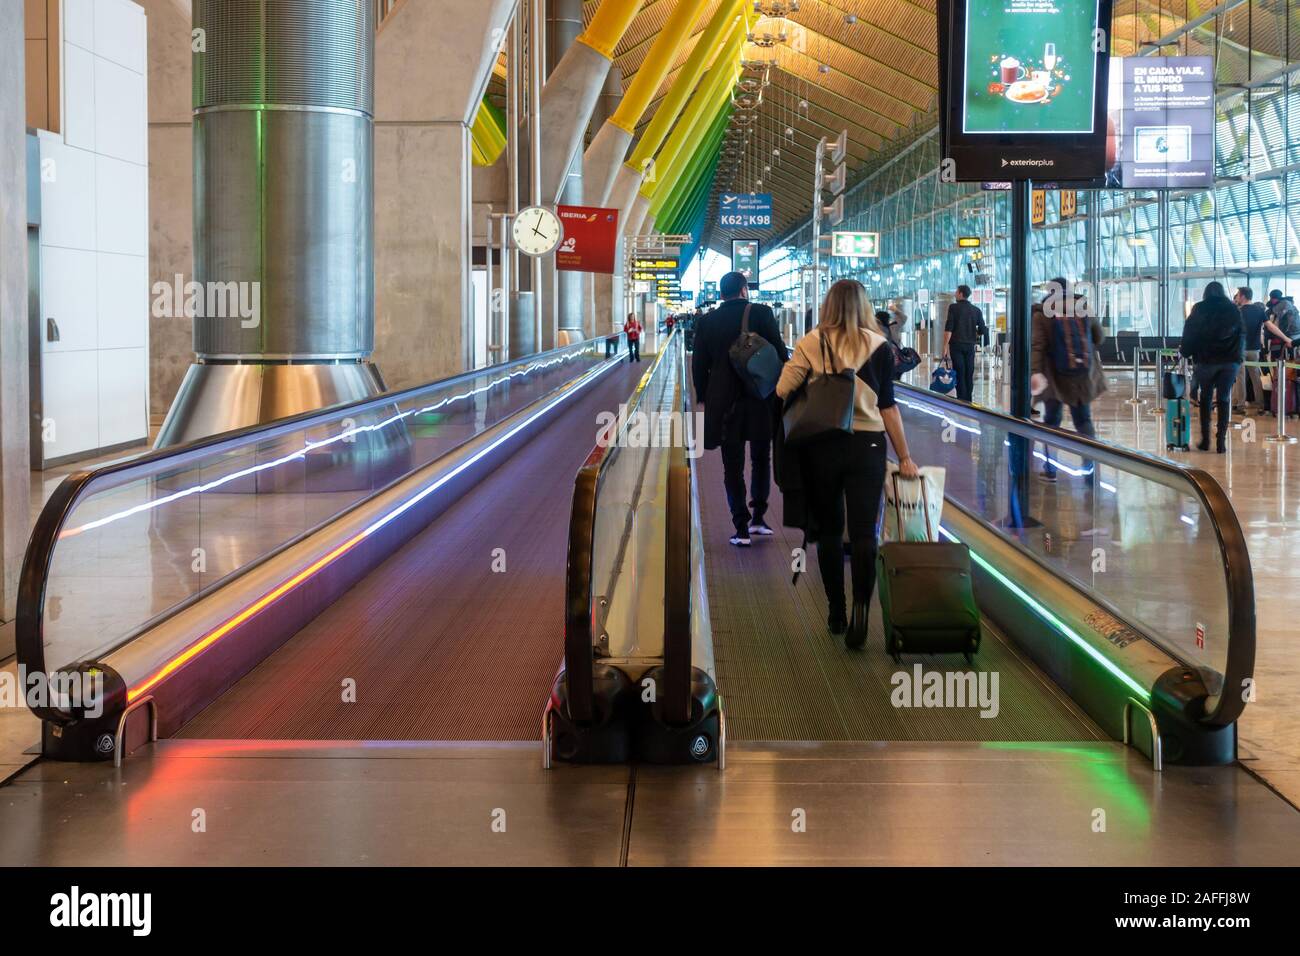 Moving walkways or travelators in Madrid-Barajas Adolfo Suárez Airport, Madrid, Spain help passengers get to their departure gates quickly. Stock Photo